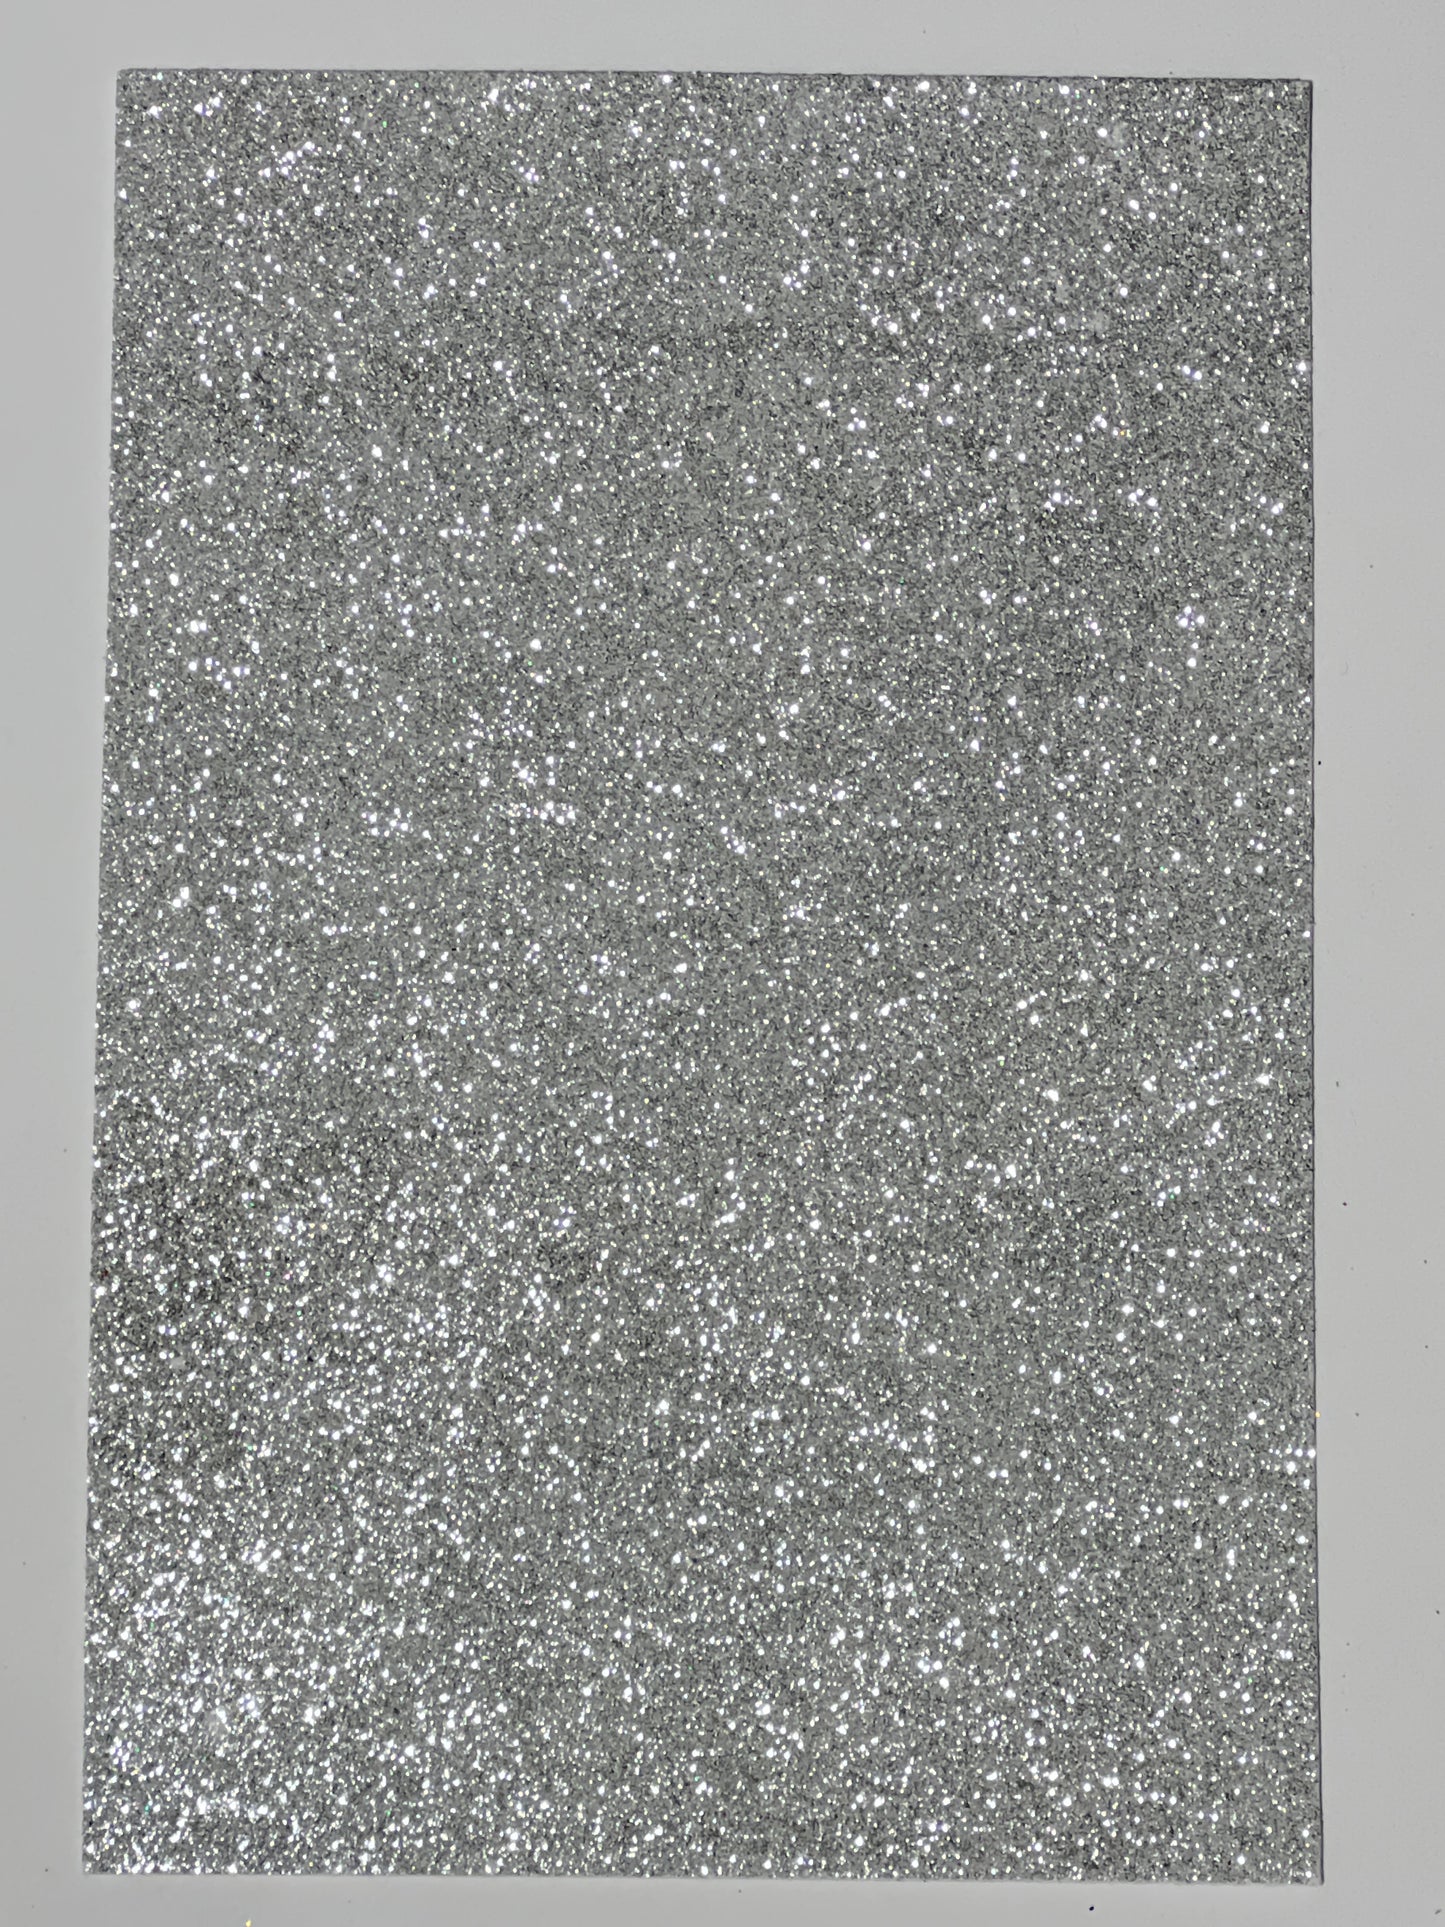 Craft Foam Glitter Silver - Size Approx 30 x 20cm - Thickness Approx 1.5mm